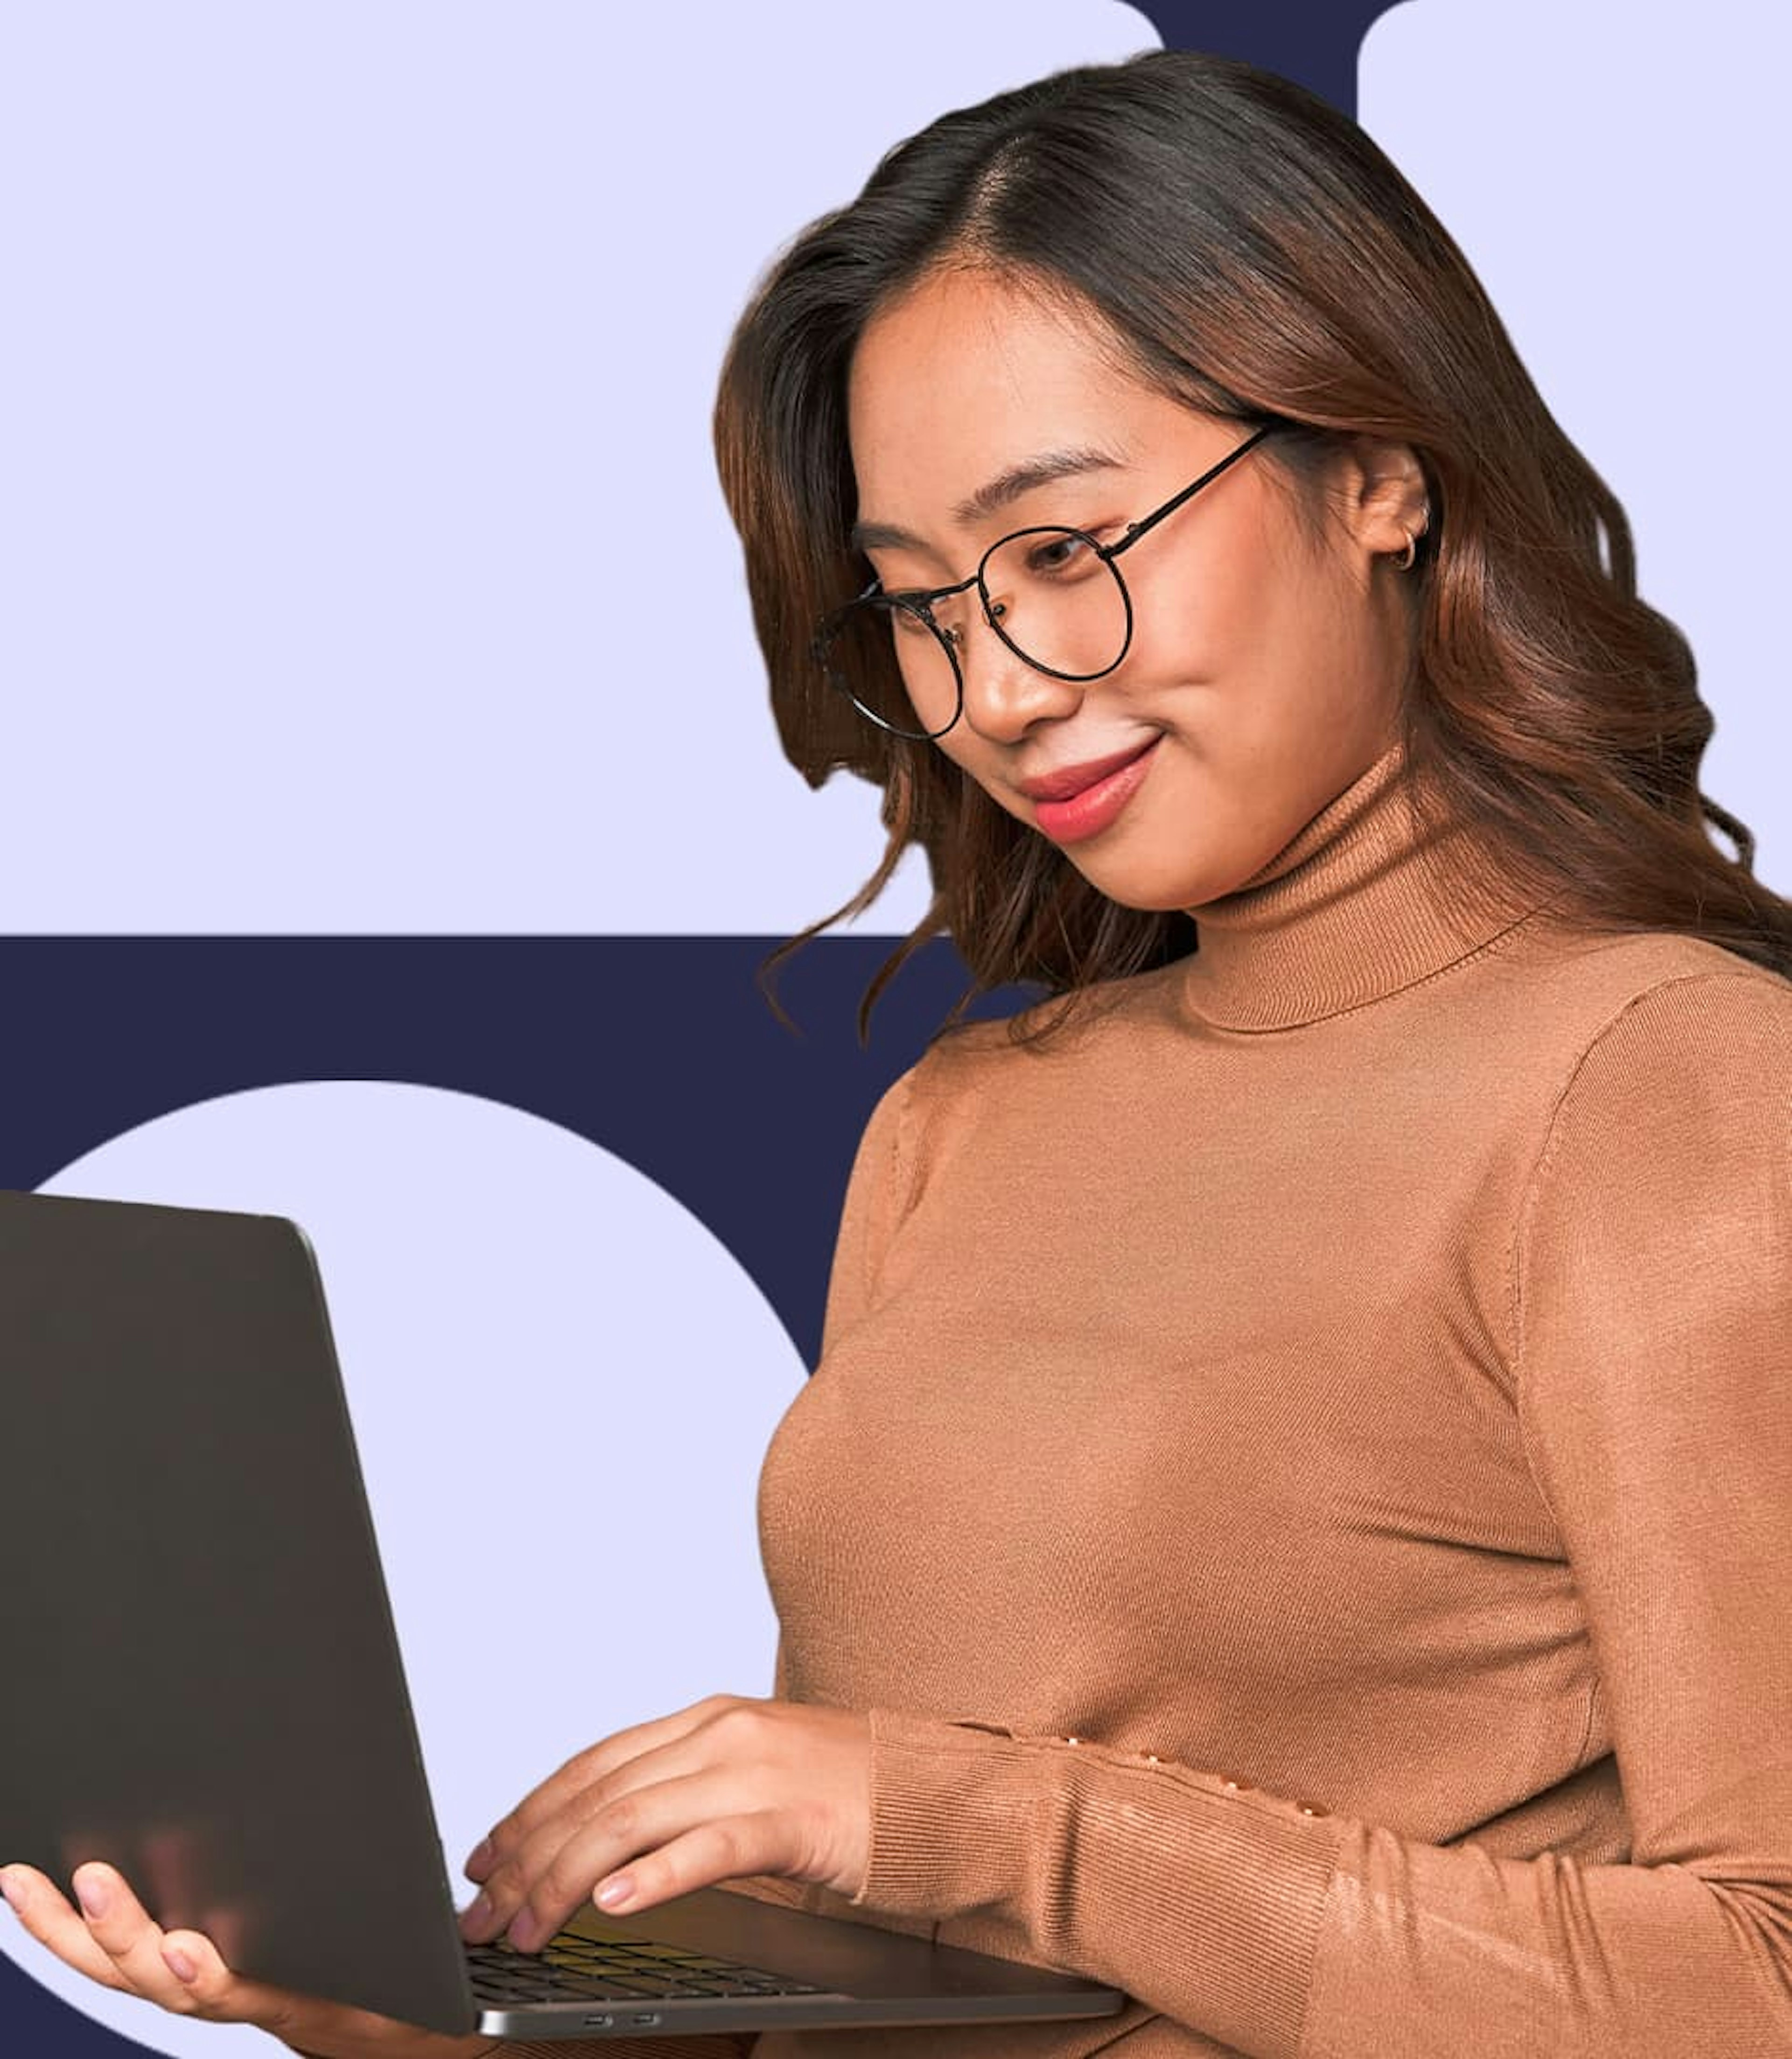 A woman wearing a tan turtleneck and glasses is holding a laptop and working.